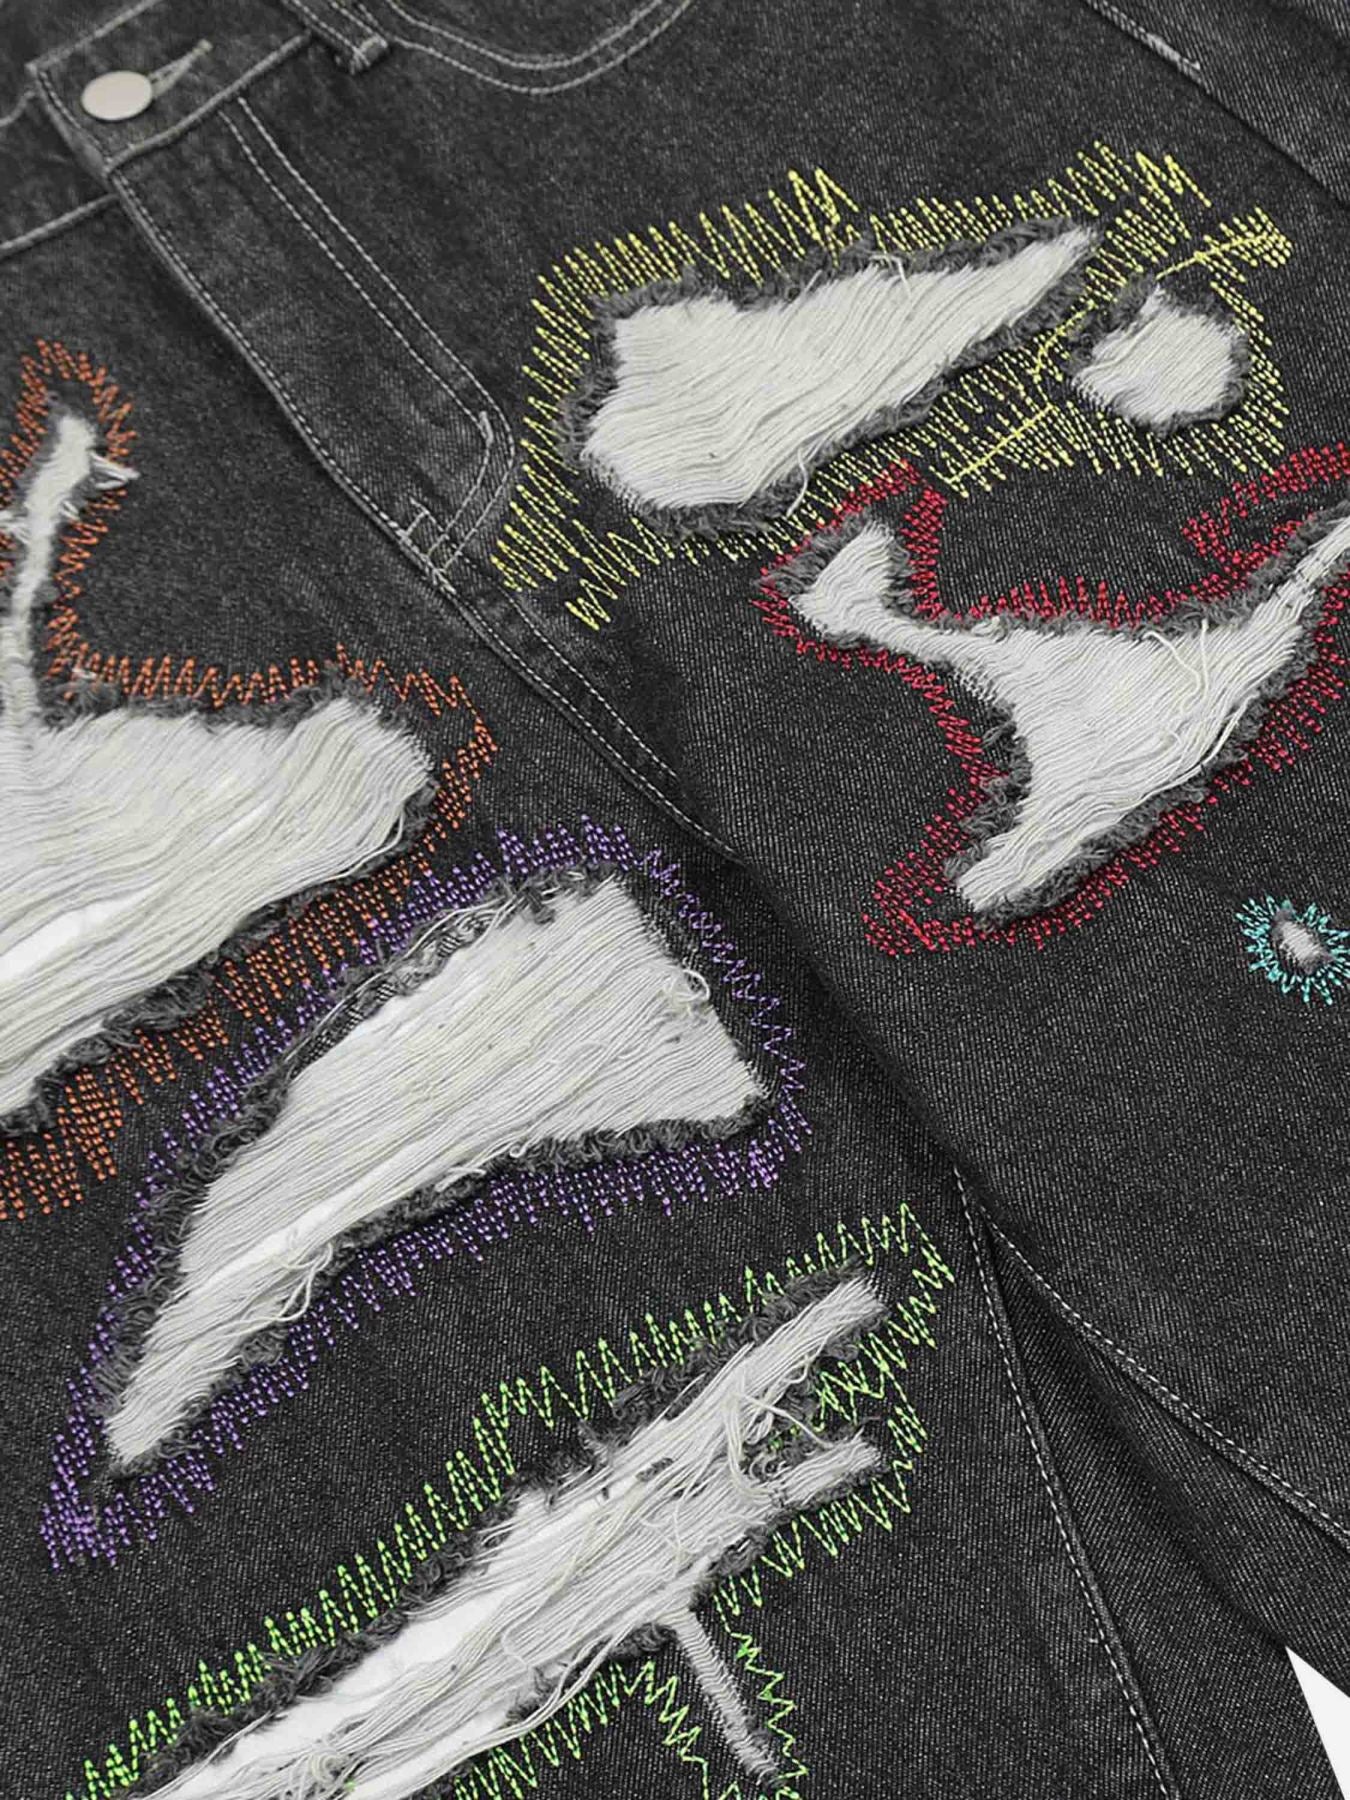 The Supermade American Style Worn And Torn Embroidered Jeans